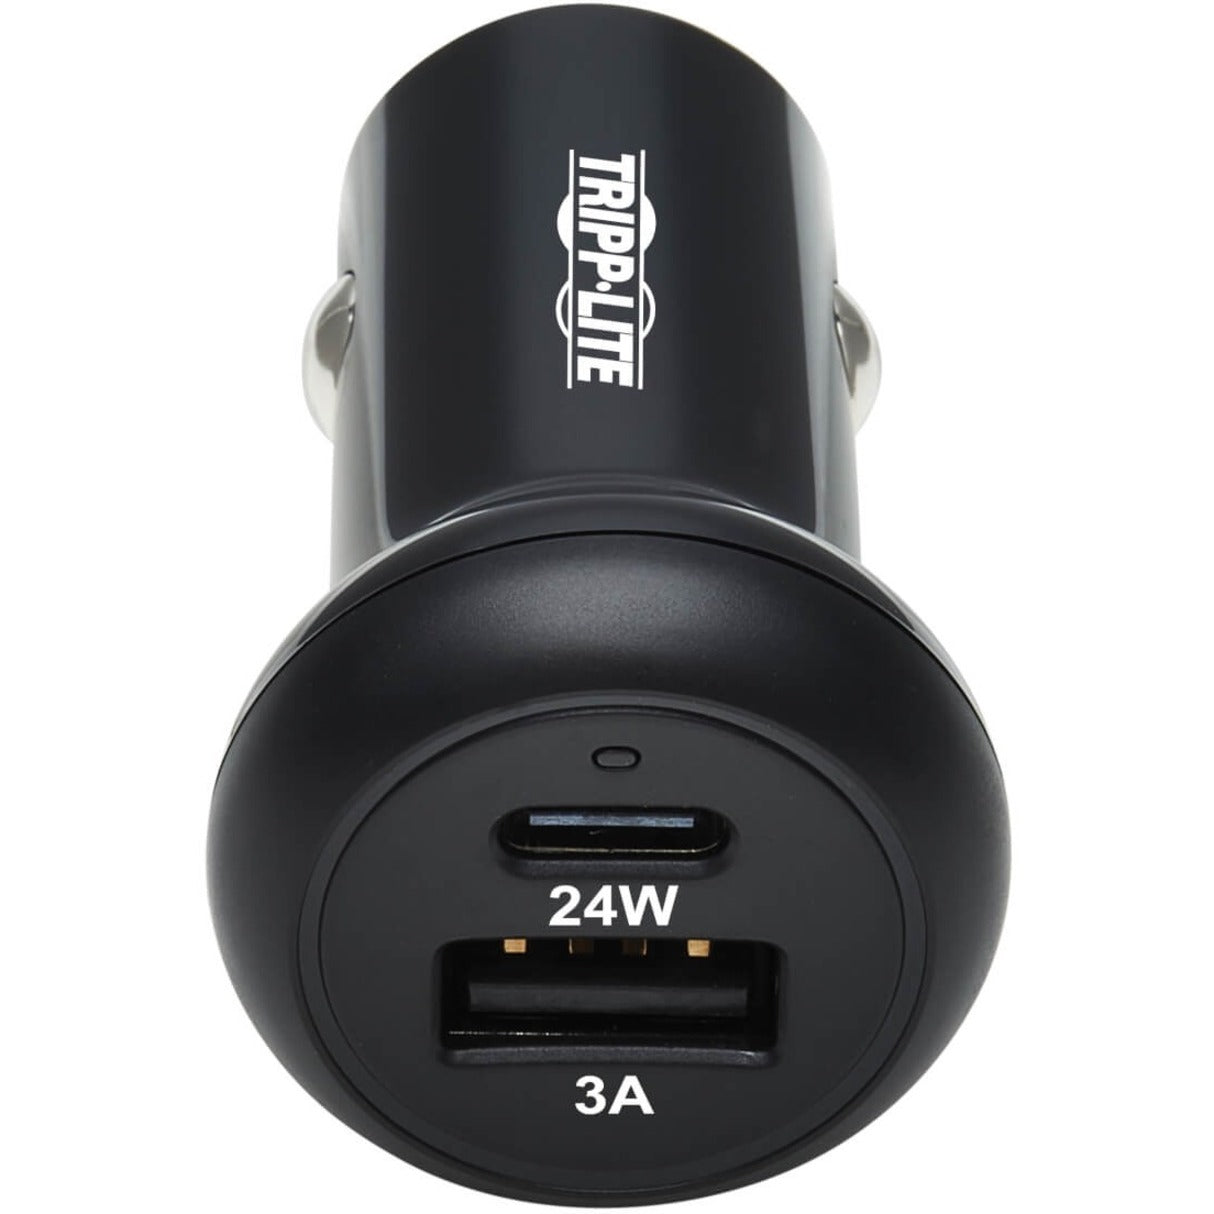 Tripp Lite U280-C02-24W-1B Auto Adapter, Dual Port USB Car Charger, 24W USB C USB-A, Fast Charging for Smartphones, Tablets, and More